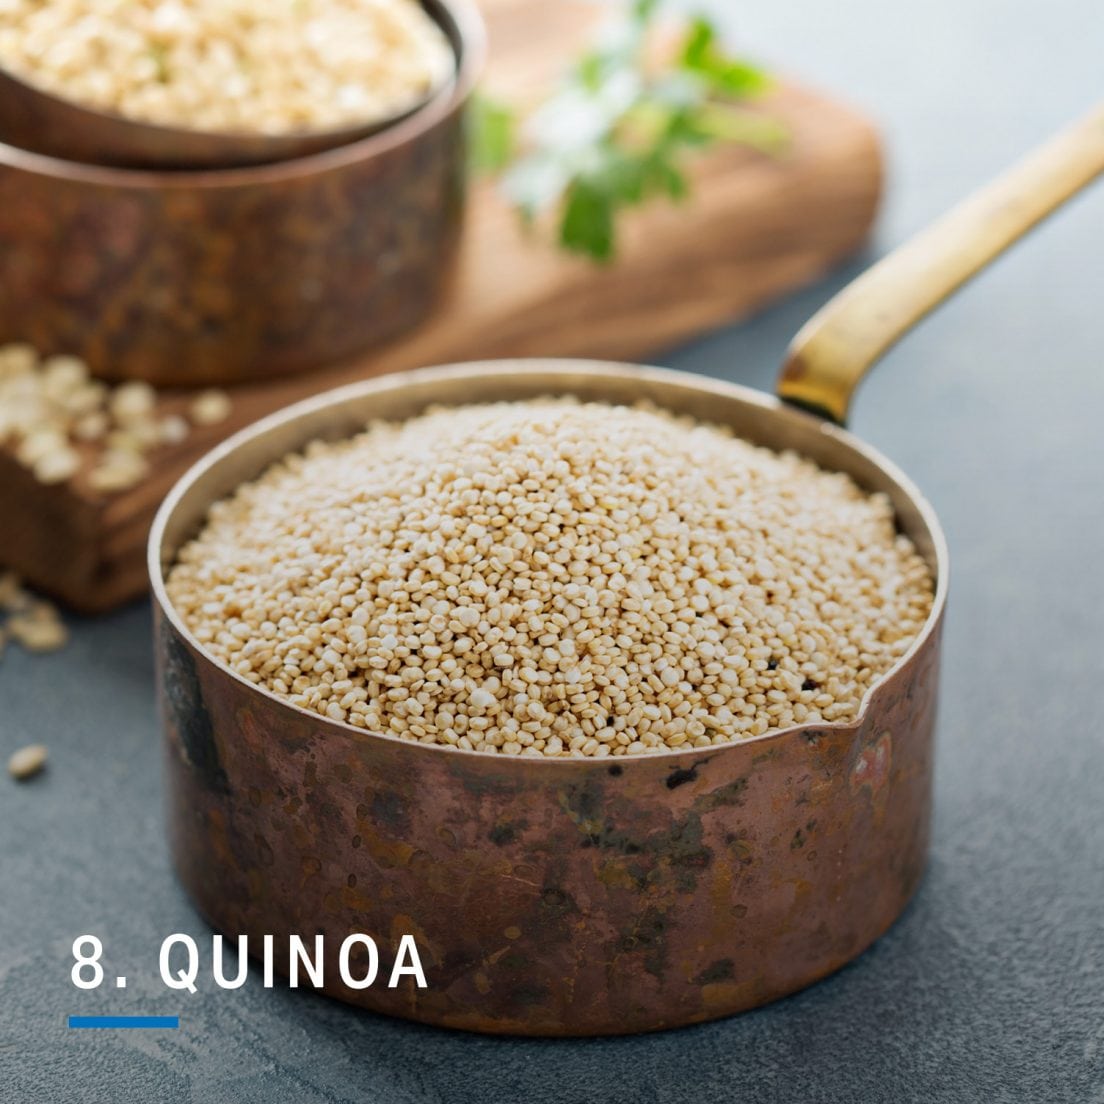 The 10 Ancient Grains You Need to Know | Nutrition | MyFitnessPal